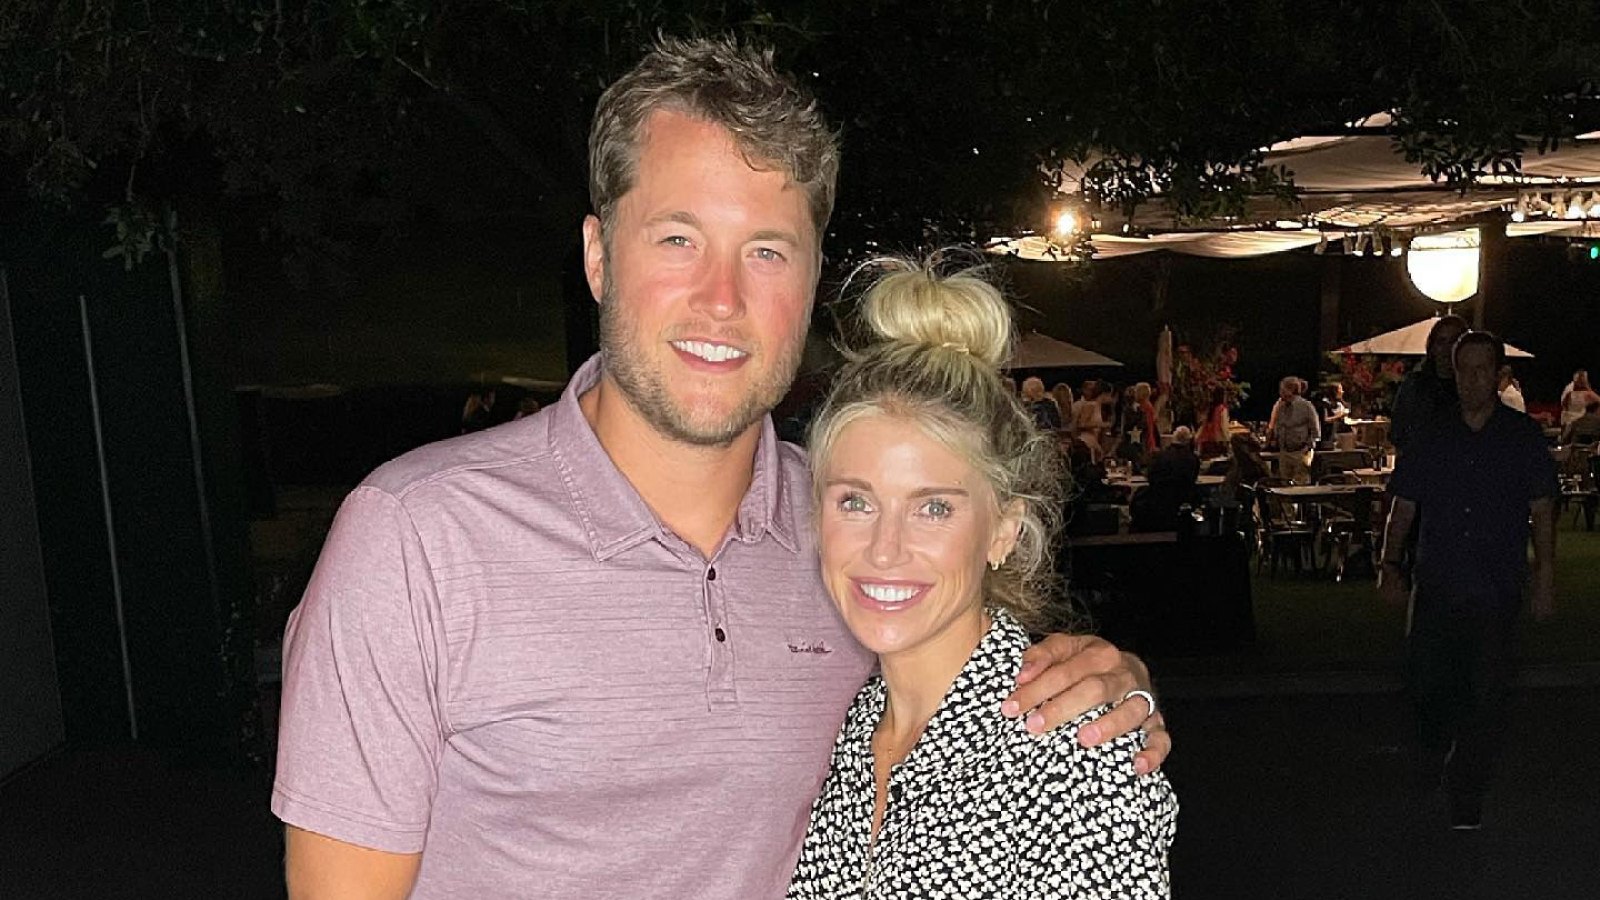 Matthew Stafford’s Wife Kelly Defends Him After Super Bowl Win